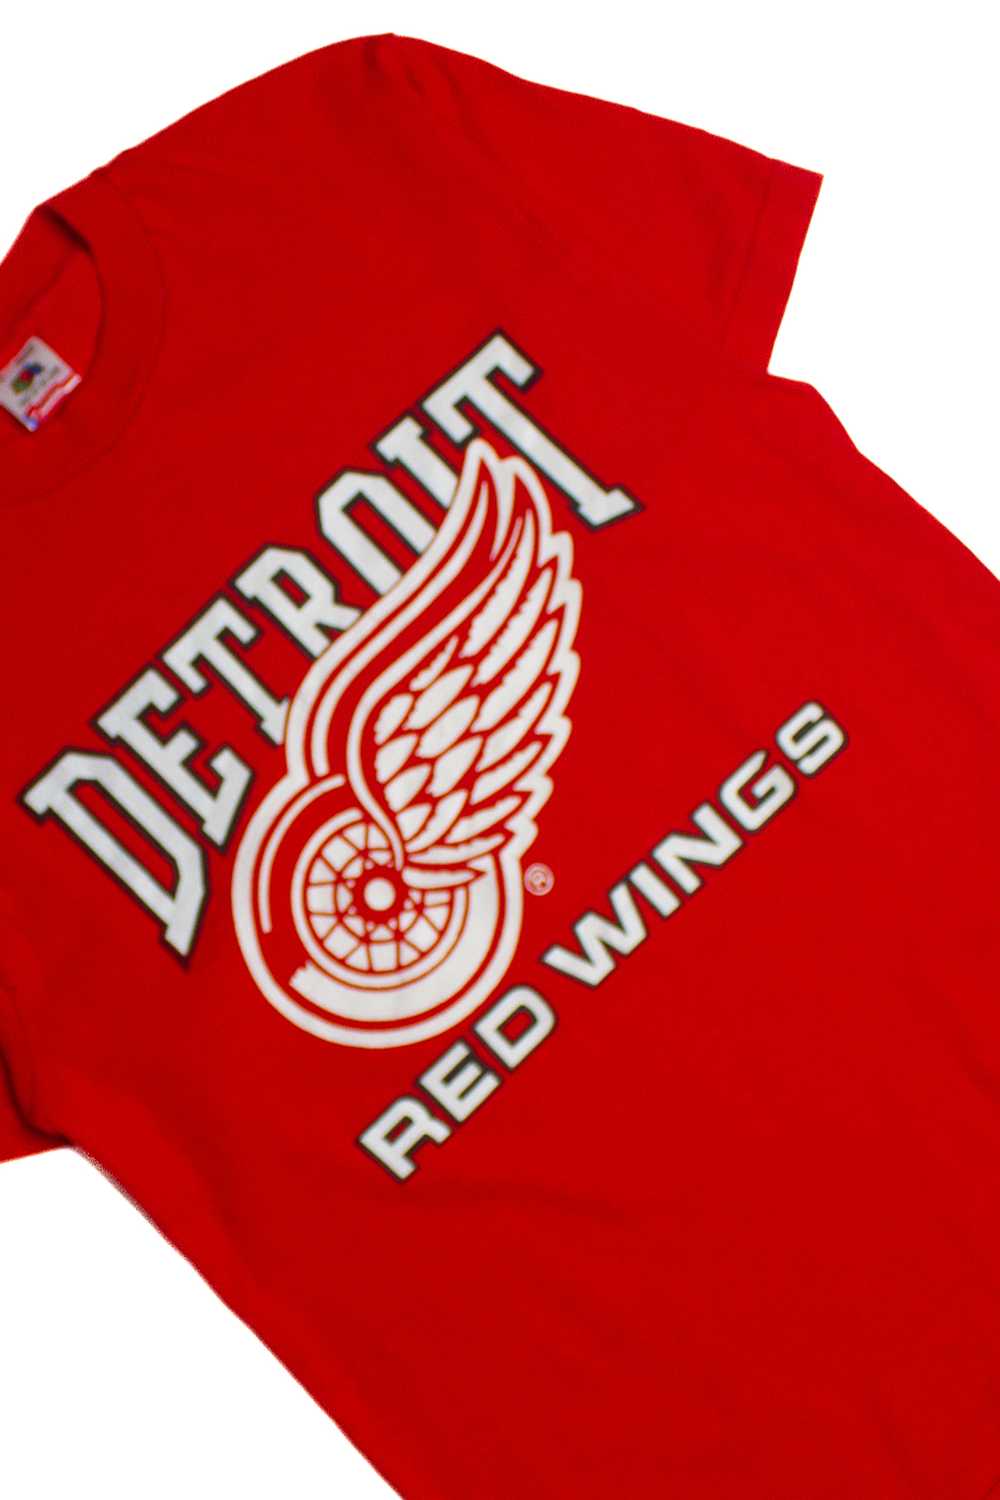 Vintage Detroit Red Wings T-Shirt (1990s) 9460 - image 2